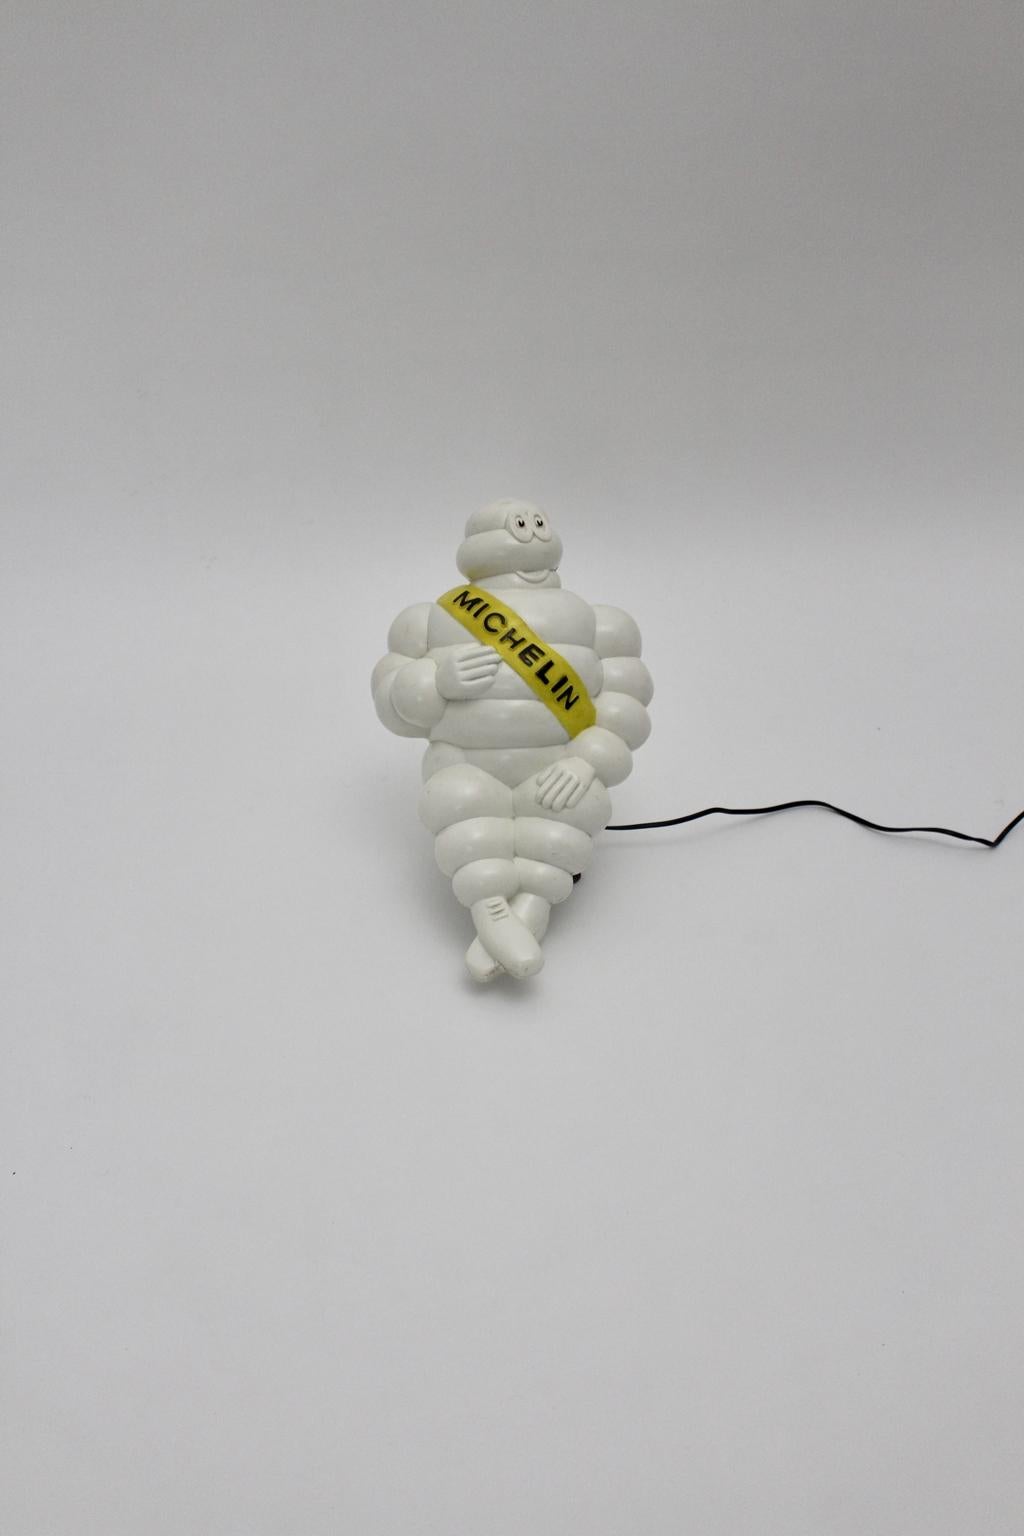 Space Age vintage white Bibendum Michelin advertising sign from plastic 1960s France. The Michelin man lamp was made of white plastic and shows a yellow ribbon across its body with the black emblem Michelin.
The Bibendum Michelin lamp was the mascot